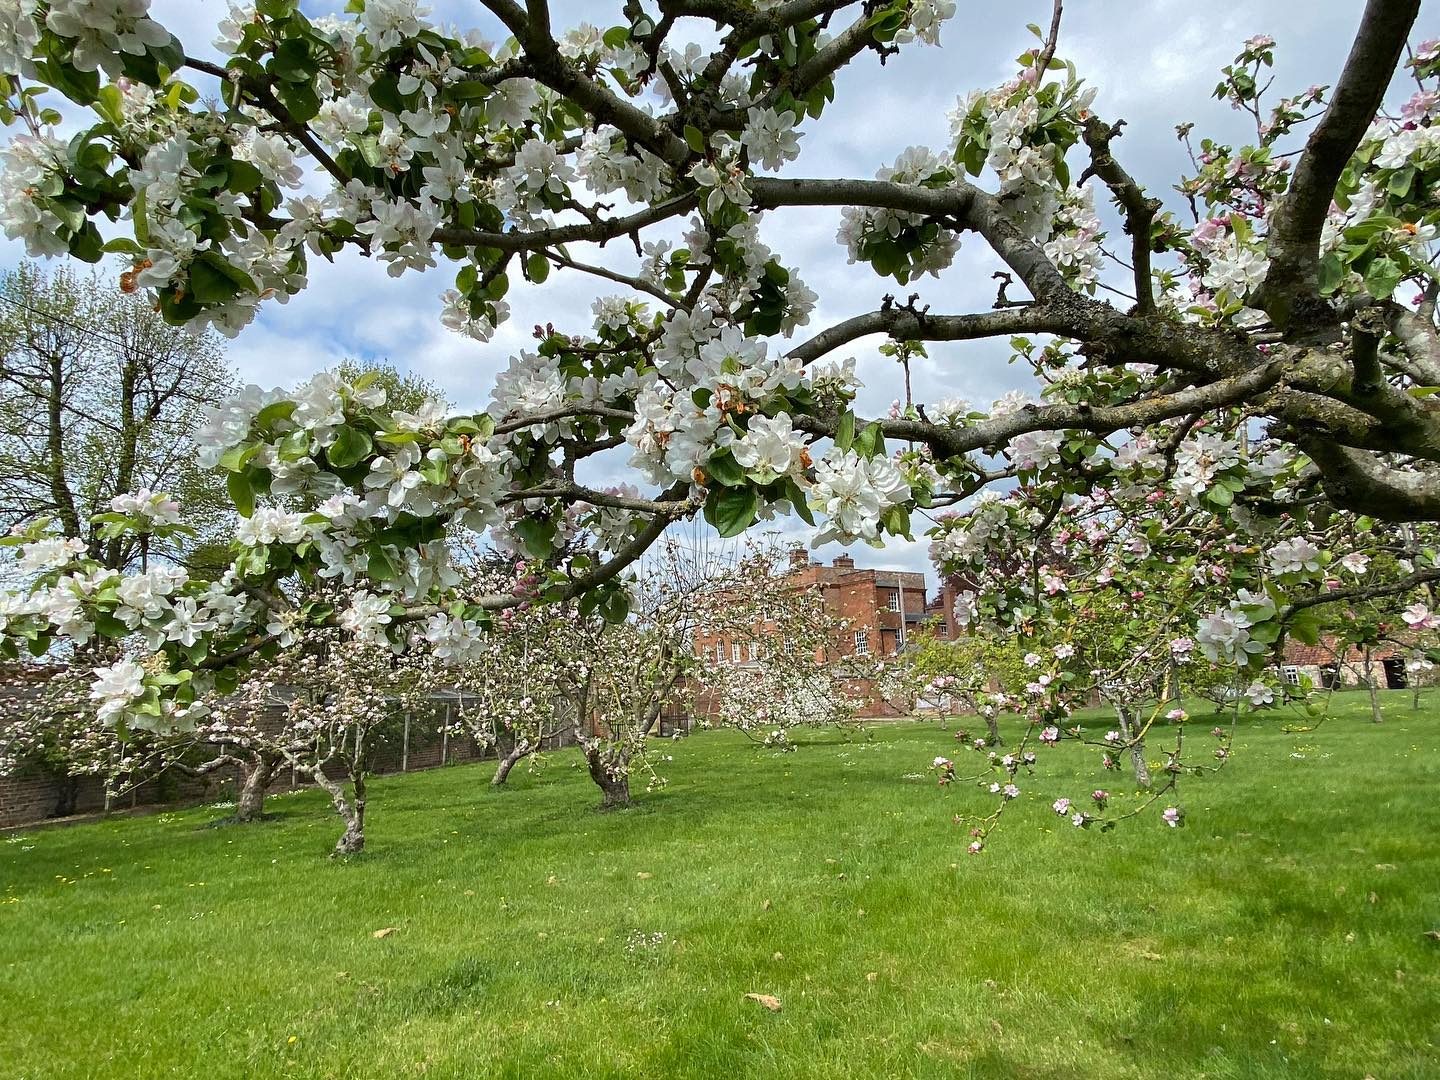 Beautiful apple blossoms in the orchard at the moment.  Hope we have lots of apples this year 🍎 

#appleblossoms